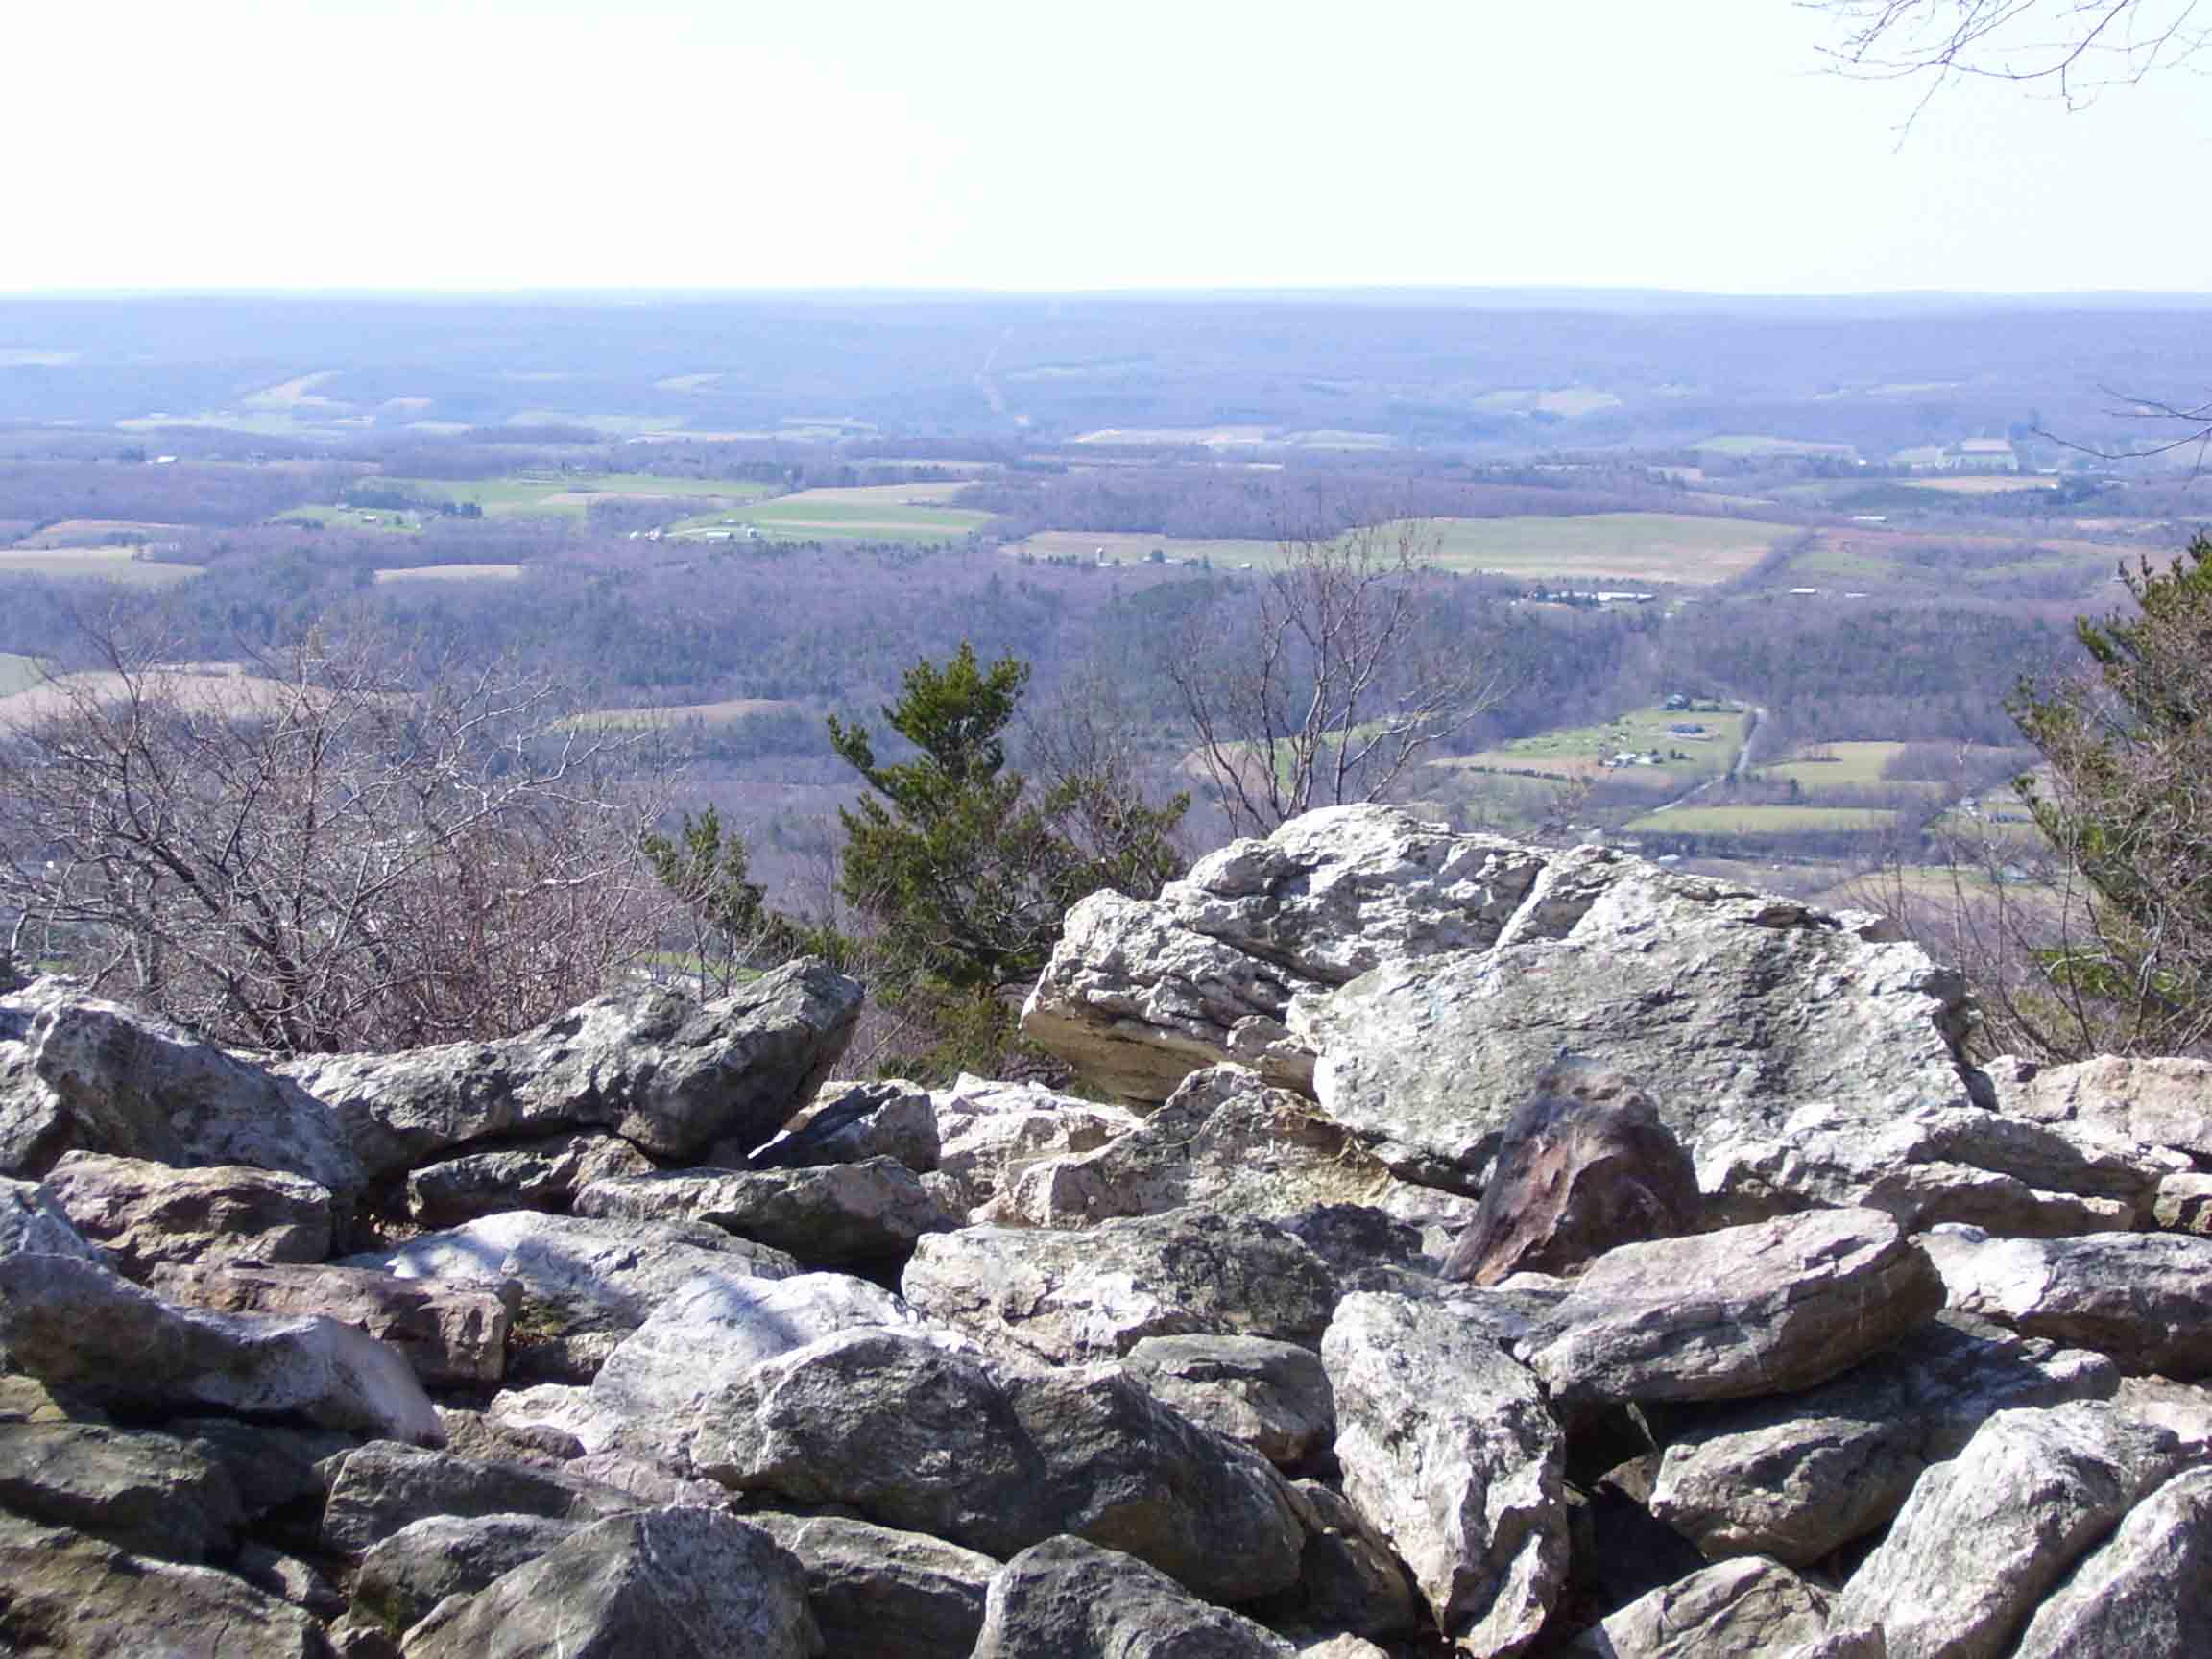 mm 8.0 - Northern view from Bake Oven Knob  Courtesy dlcul@conncoll.edu